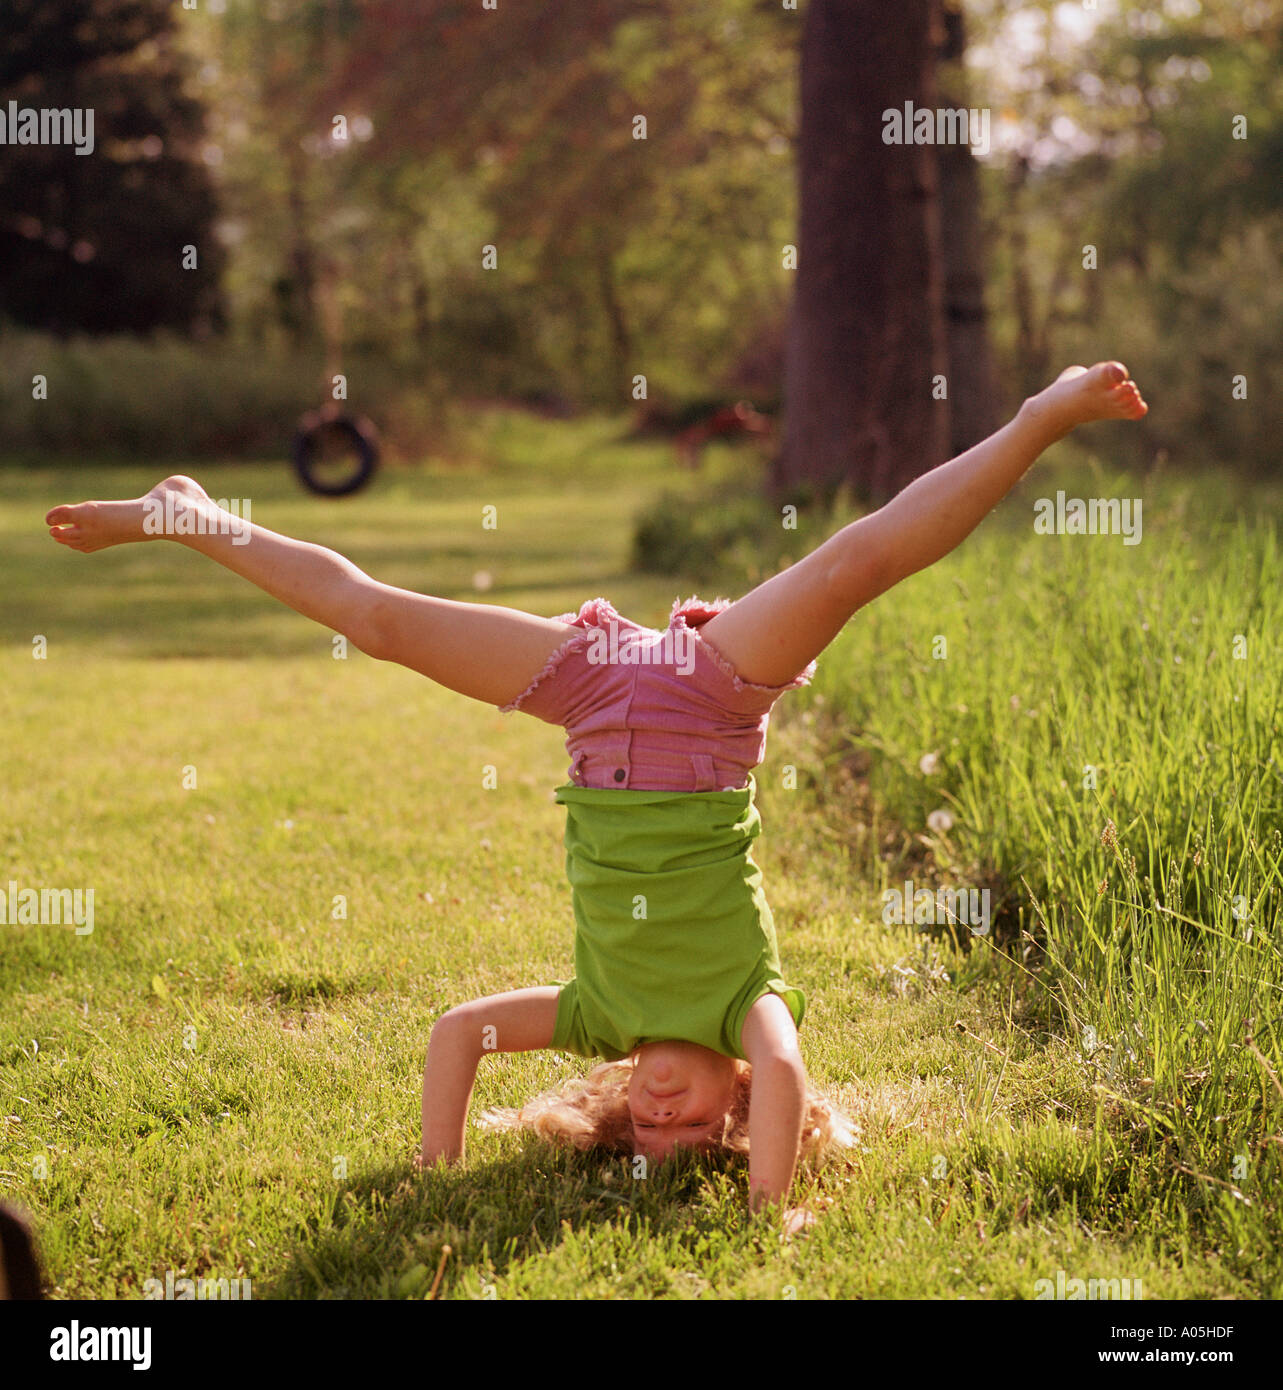 Young Girl Standing On Her Head And Hands Doing An U